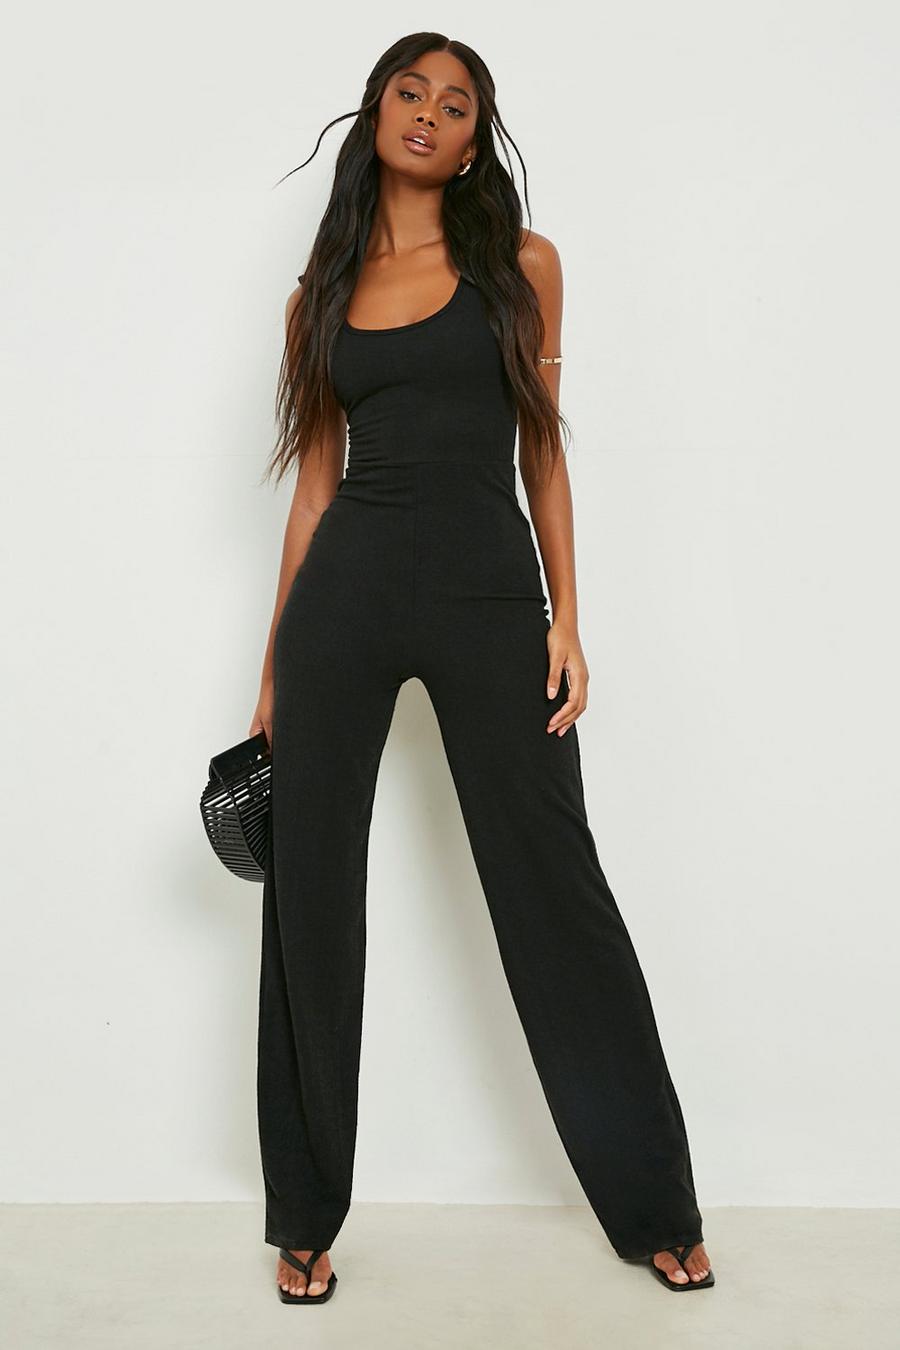 Right About Tight - Black Jumpsuit